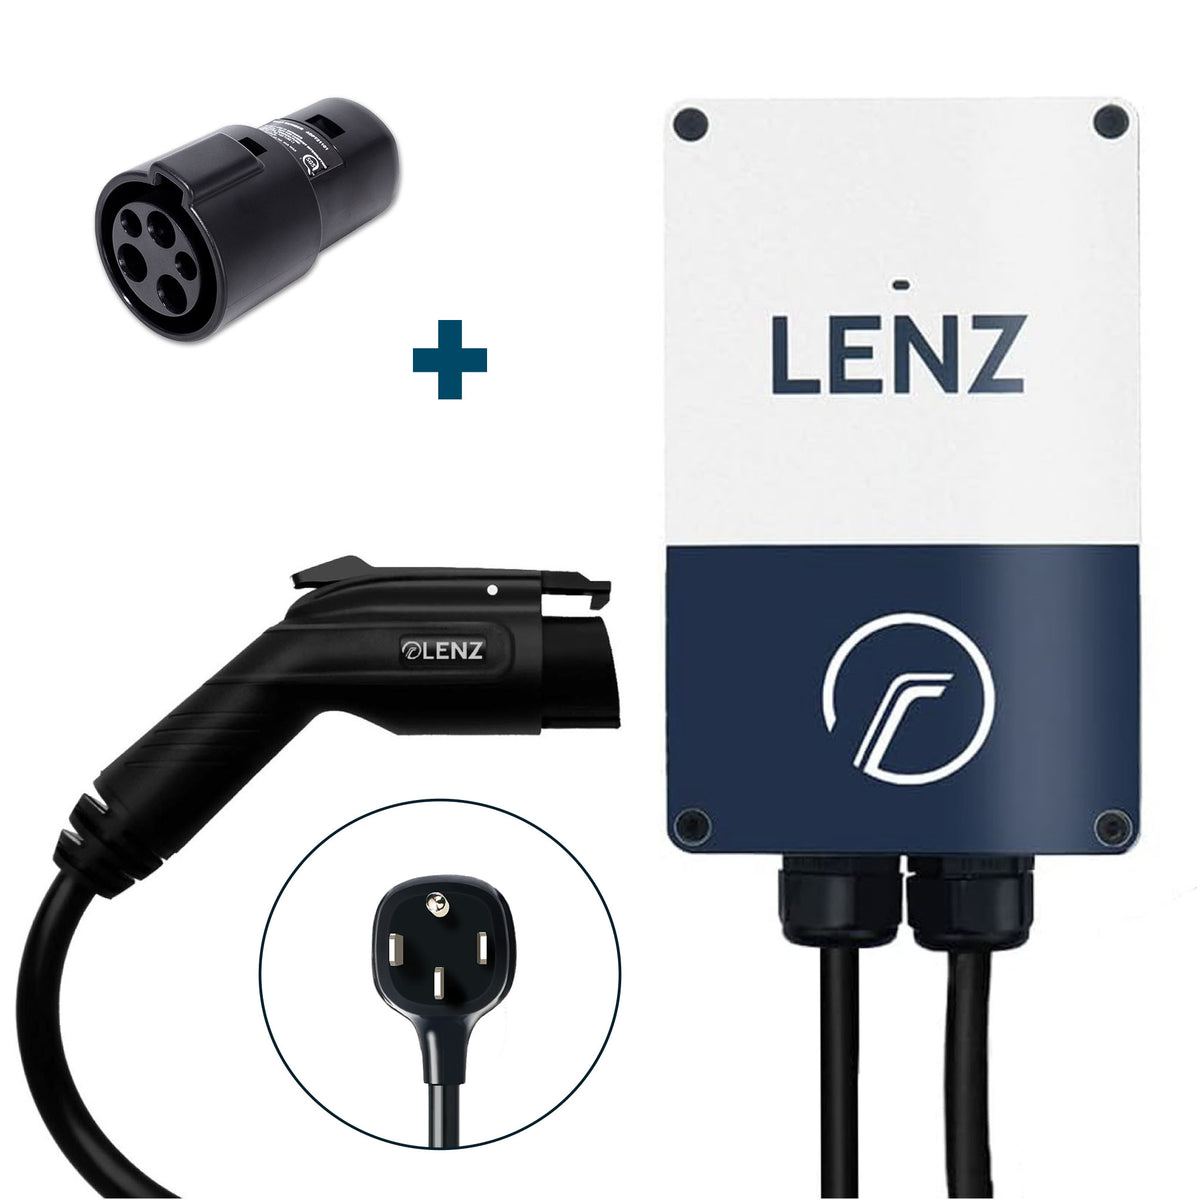 LENZ J1772 to Tesla Adapter and LENZ Level 2 Home Charger with NEMA 14-50 Plug